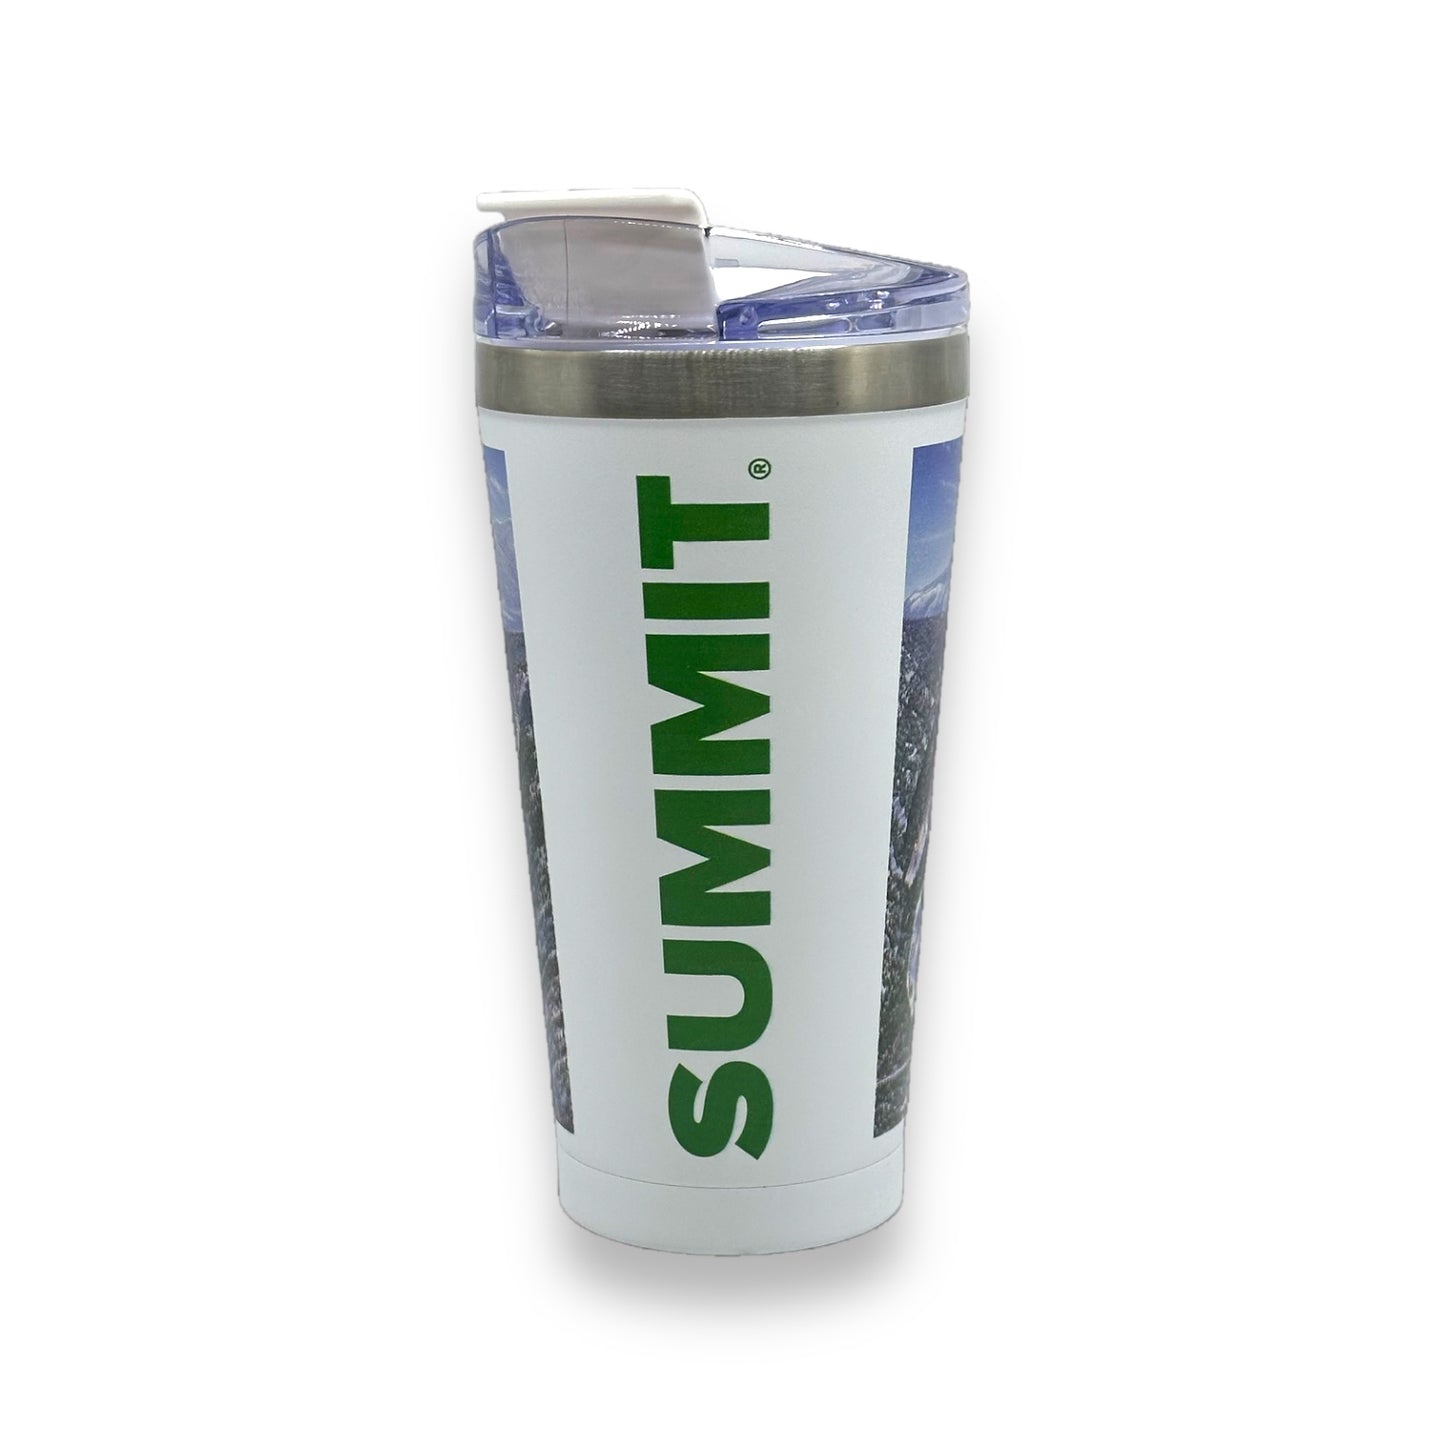 Snow Summit trails map tumbler with white base and Summit writing on side